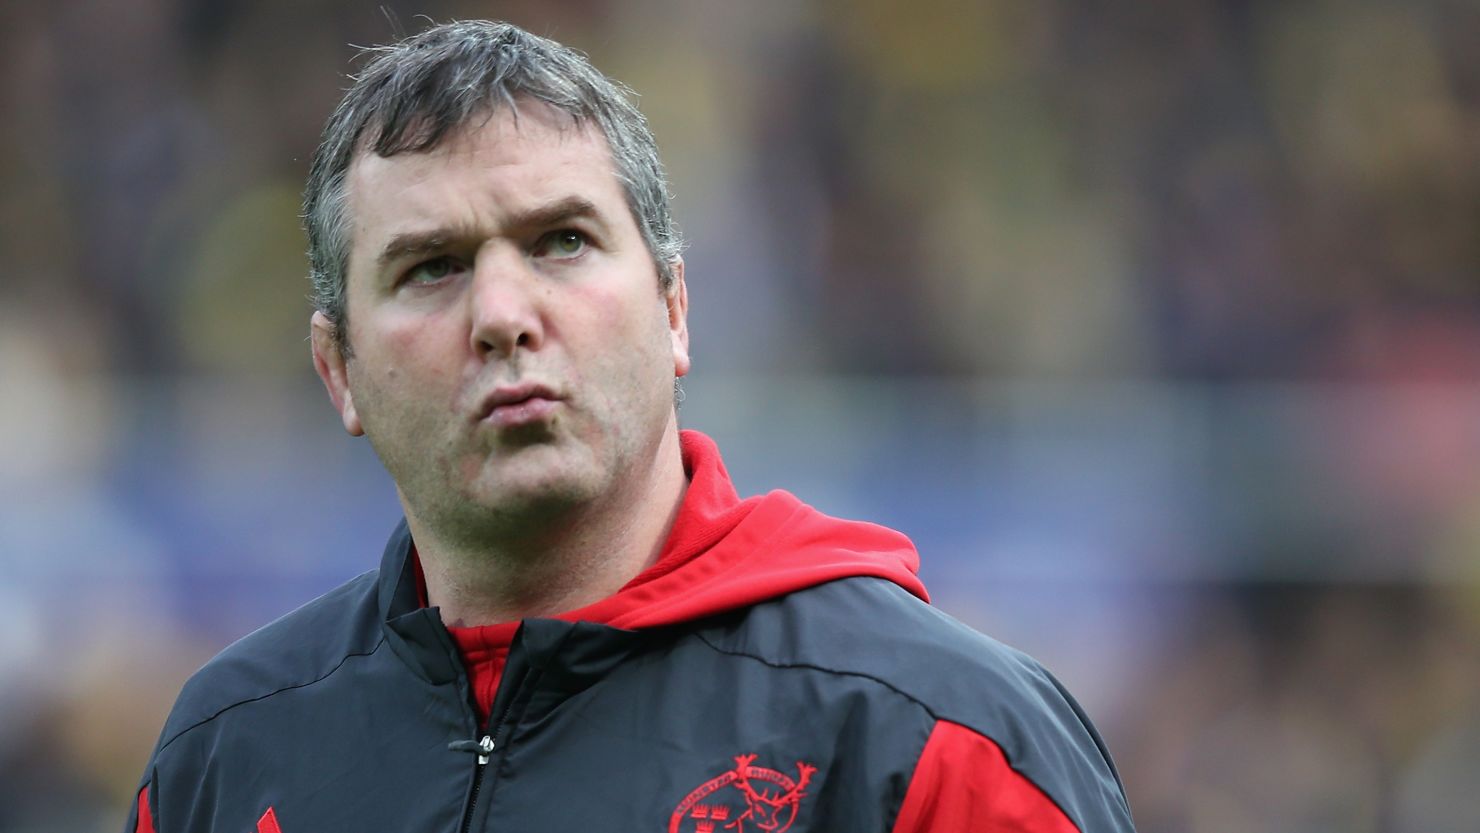 Munster coach and former Irish rugby international Anthony Foley has died, aged 42.